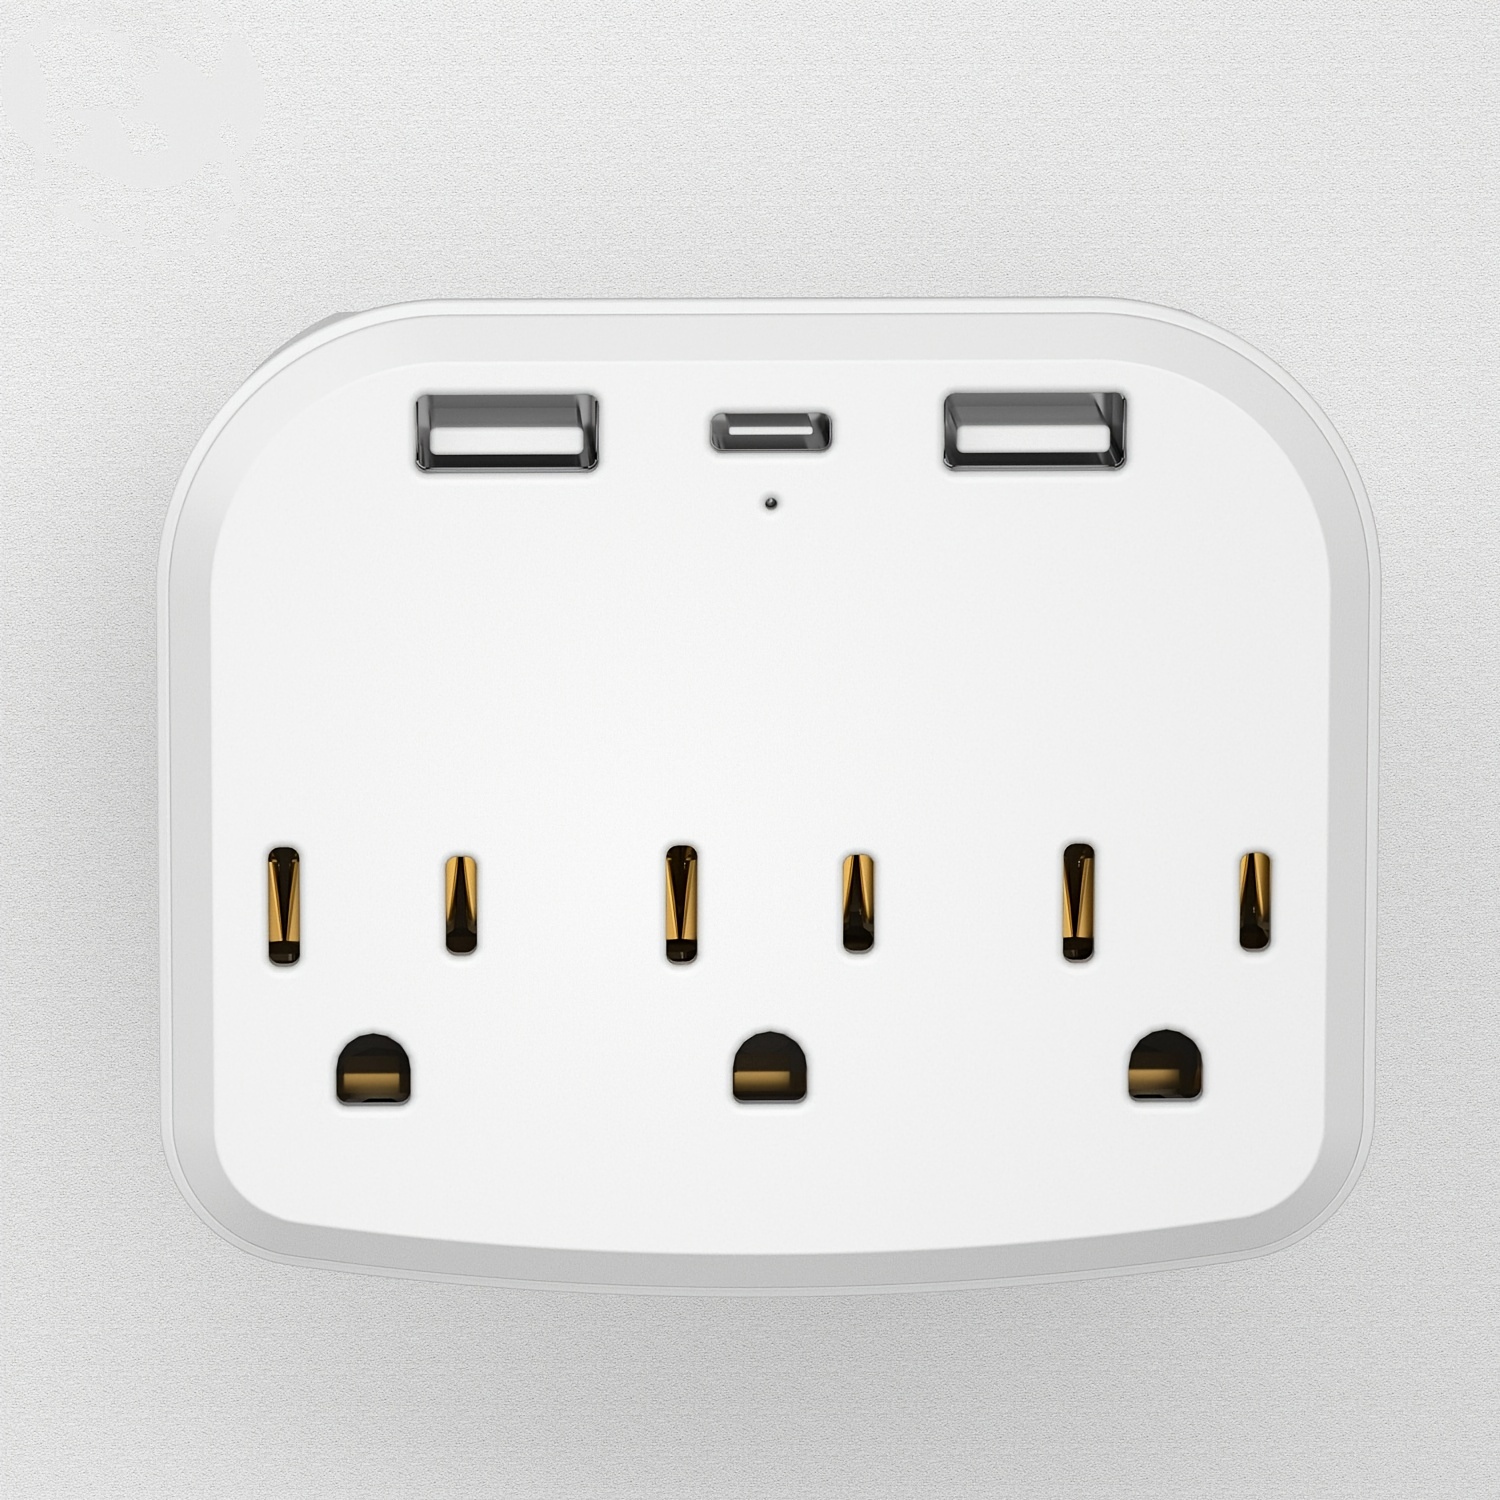 1pc Mini Outlet Extender USB Wall Charger 3 Outlet Surge Protector Power Strip With 2 USB Ports And 1 Type c Multi Plug Outlet With Spaced Outlets For Office White